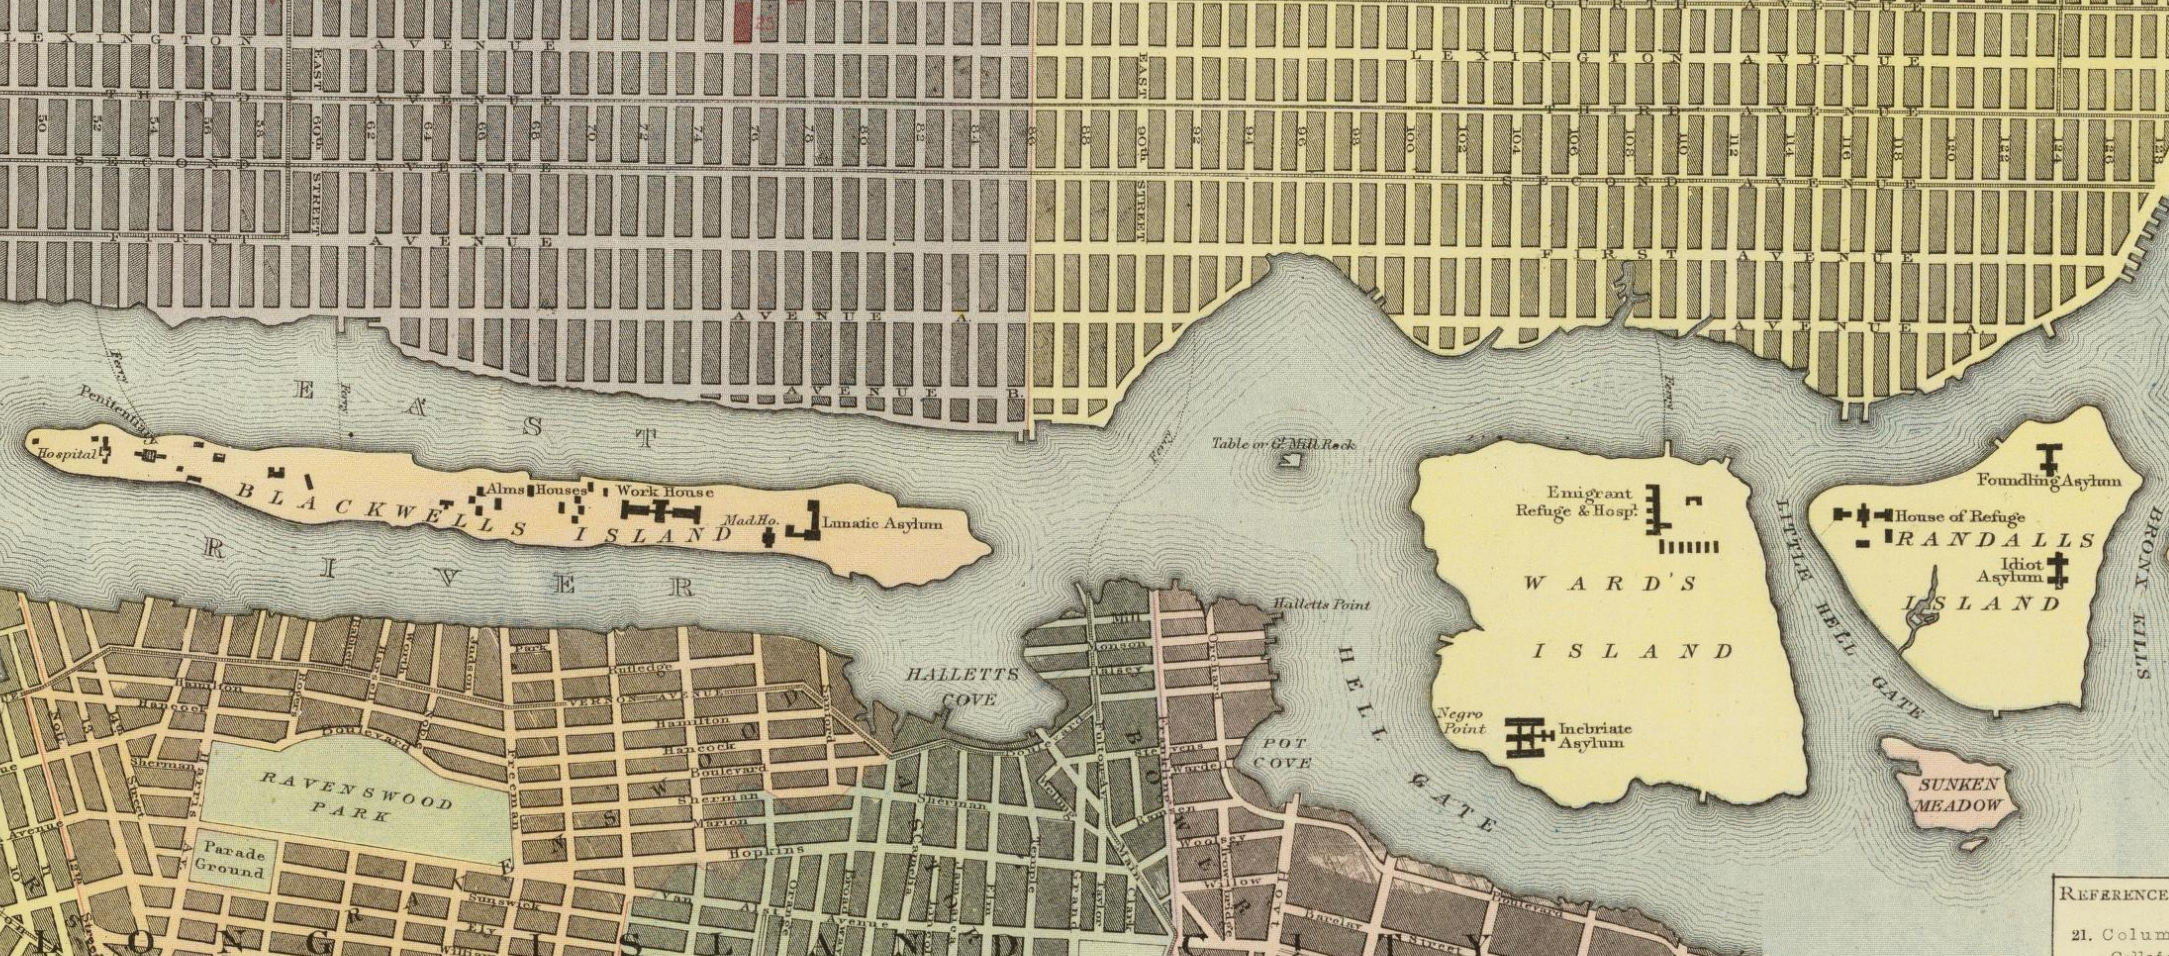 A map showing buildings on islands in the East River